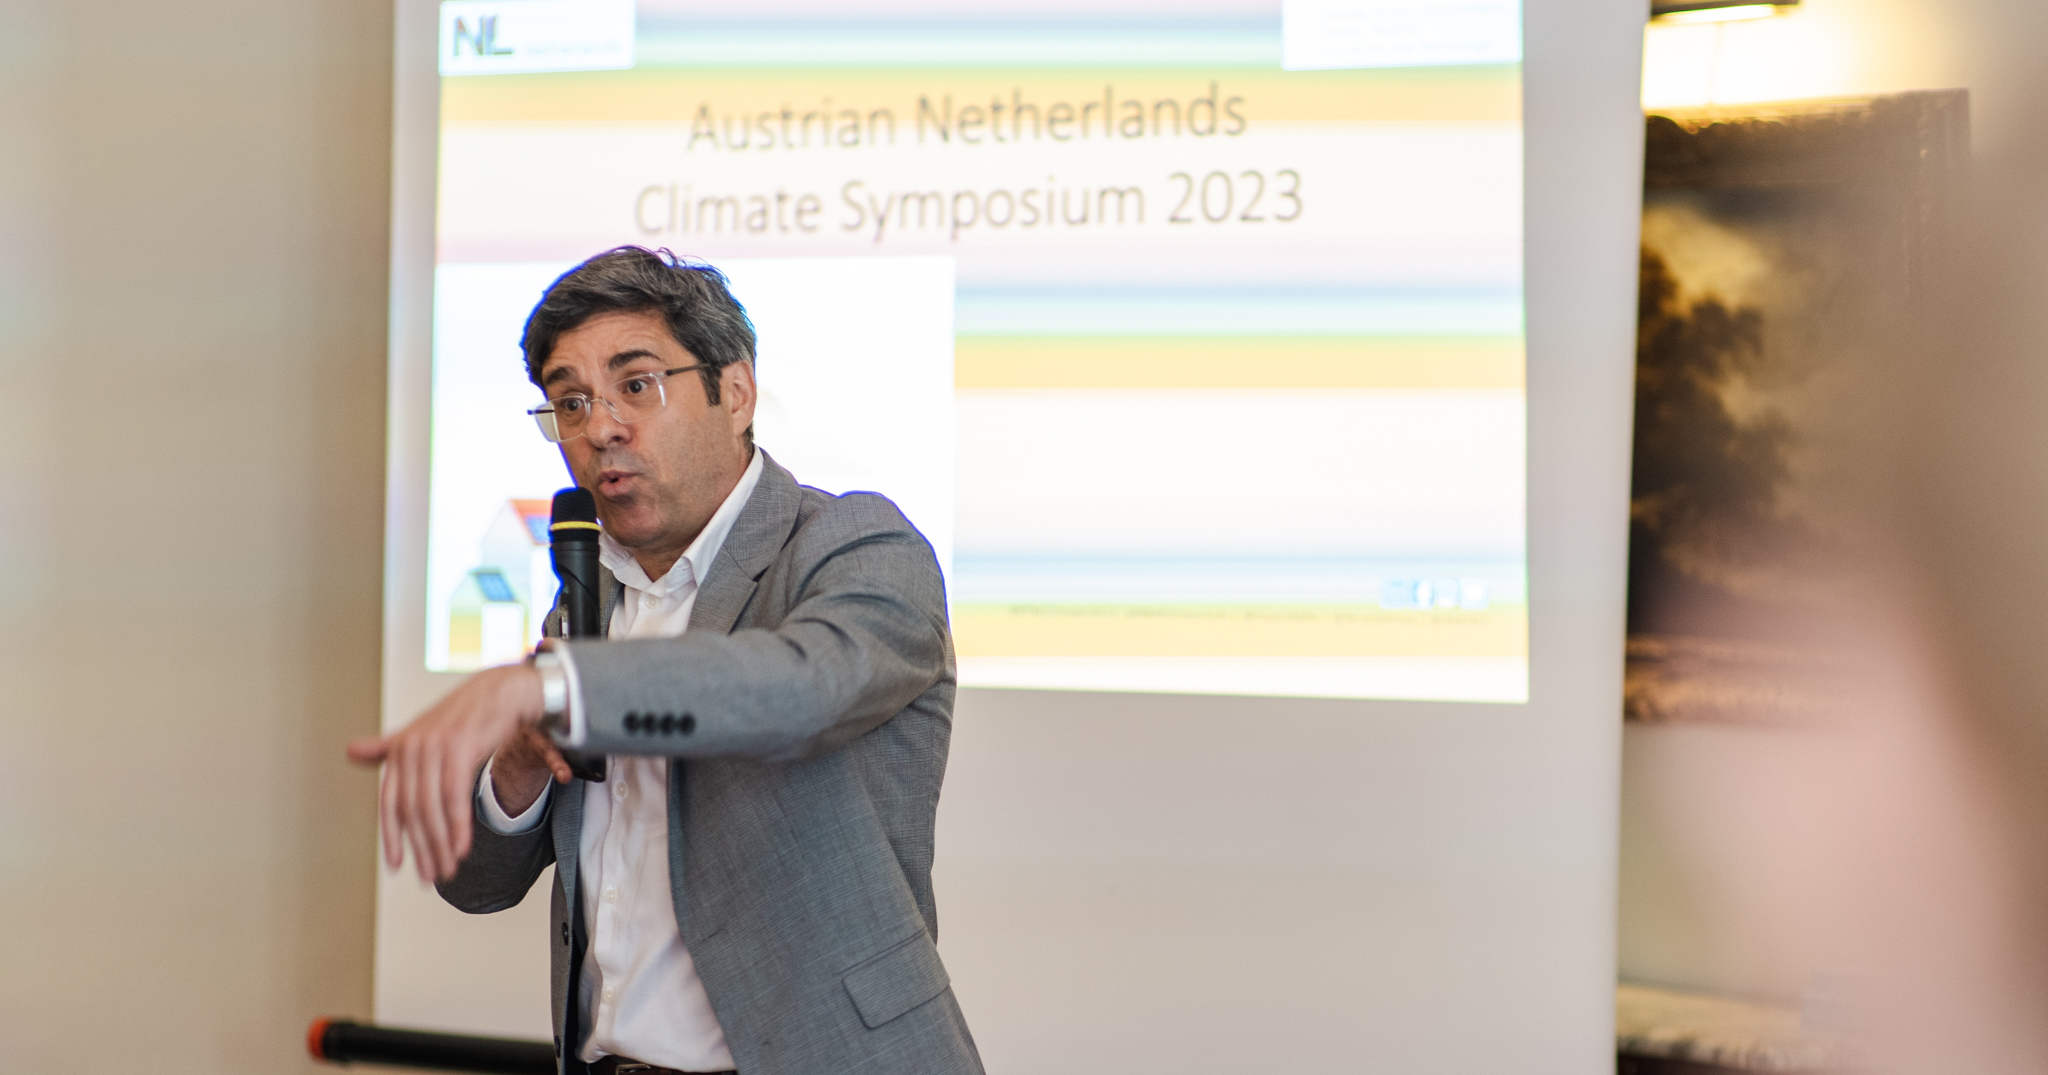 Climate change conference organised by Dutch Embassy - guest speaker Andreas Jaeger